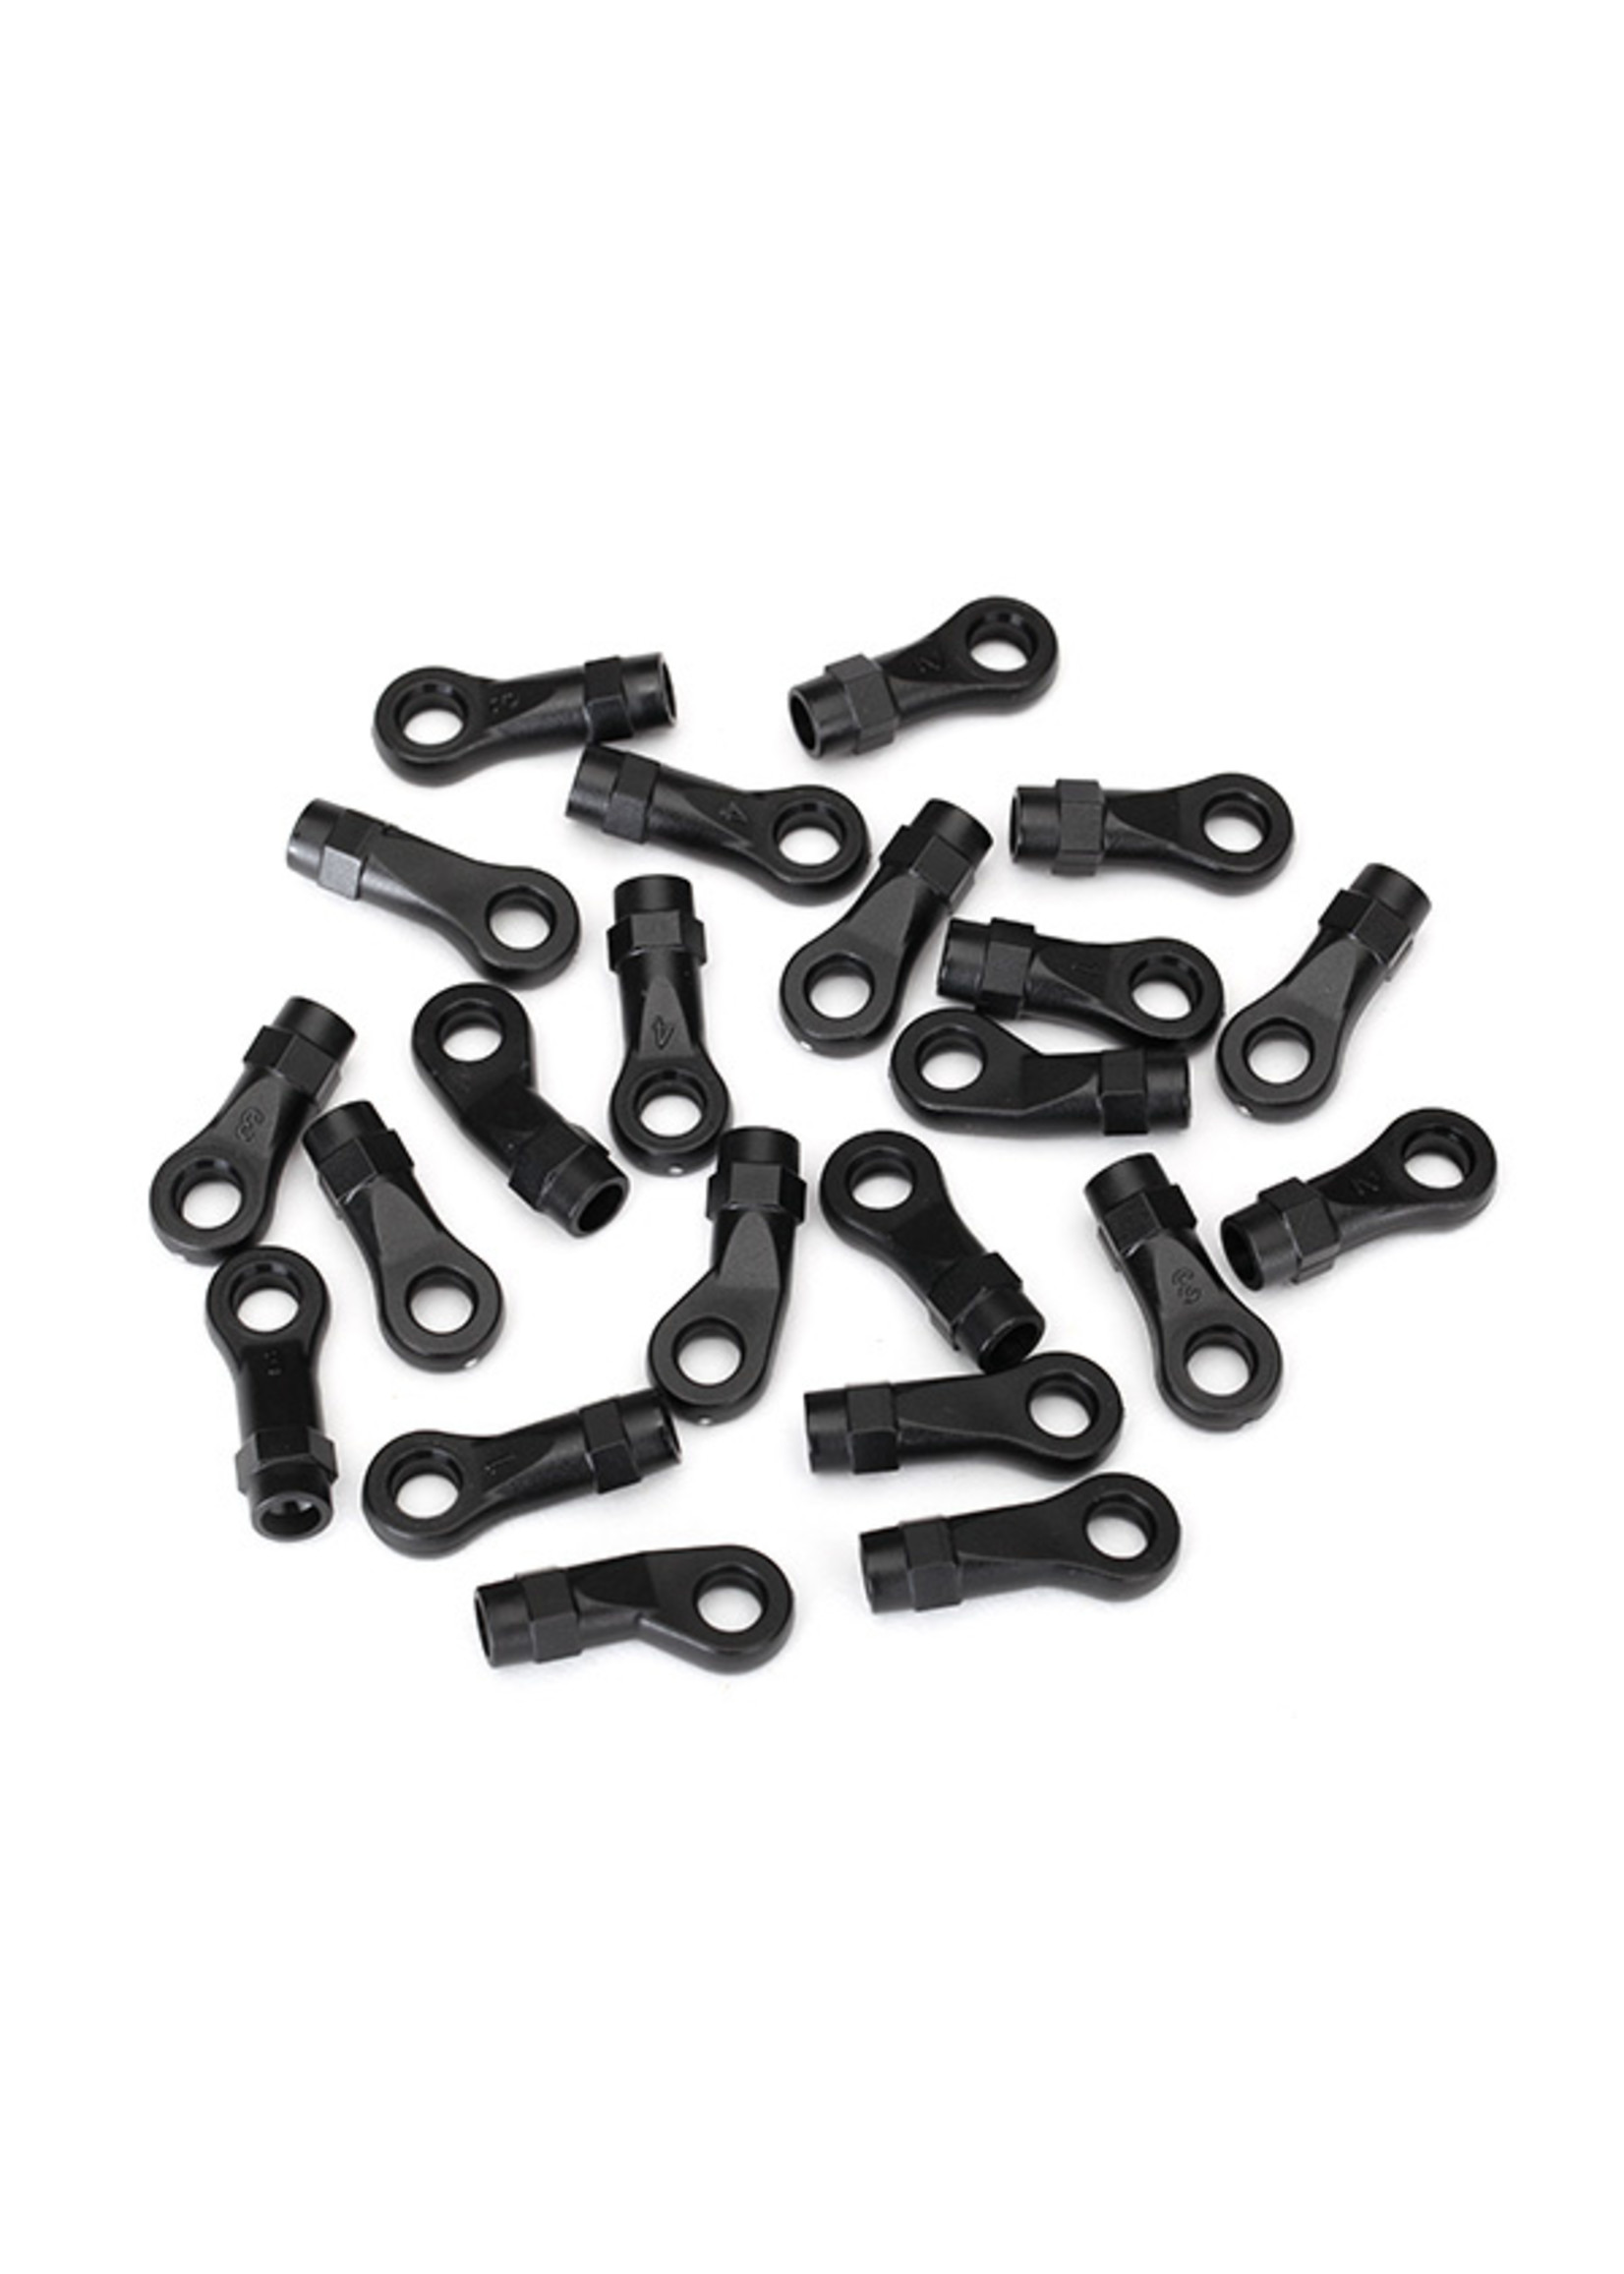 Traxxas 8275 - Rod End Set, Complete